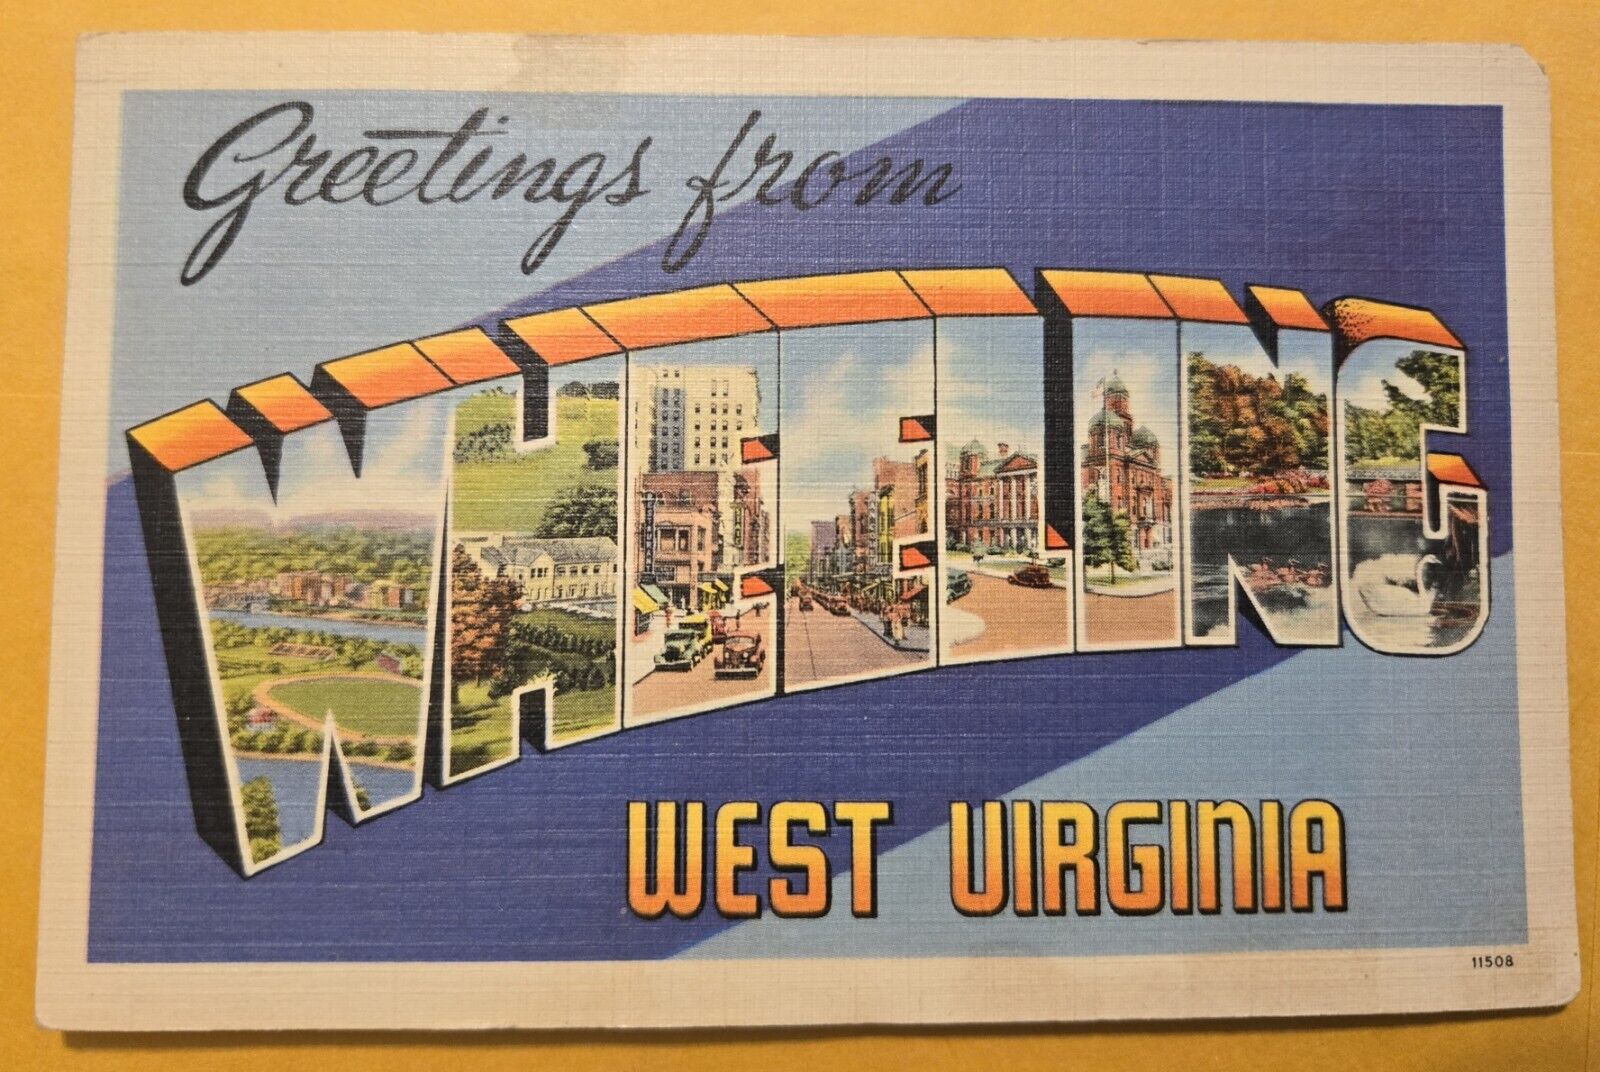 Used 1942 Linen Postcard Greetings from Wheeling West Virginia, Large Letters J2